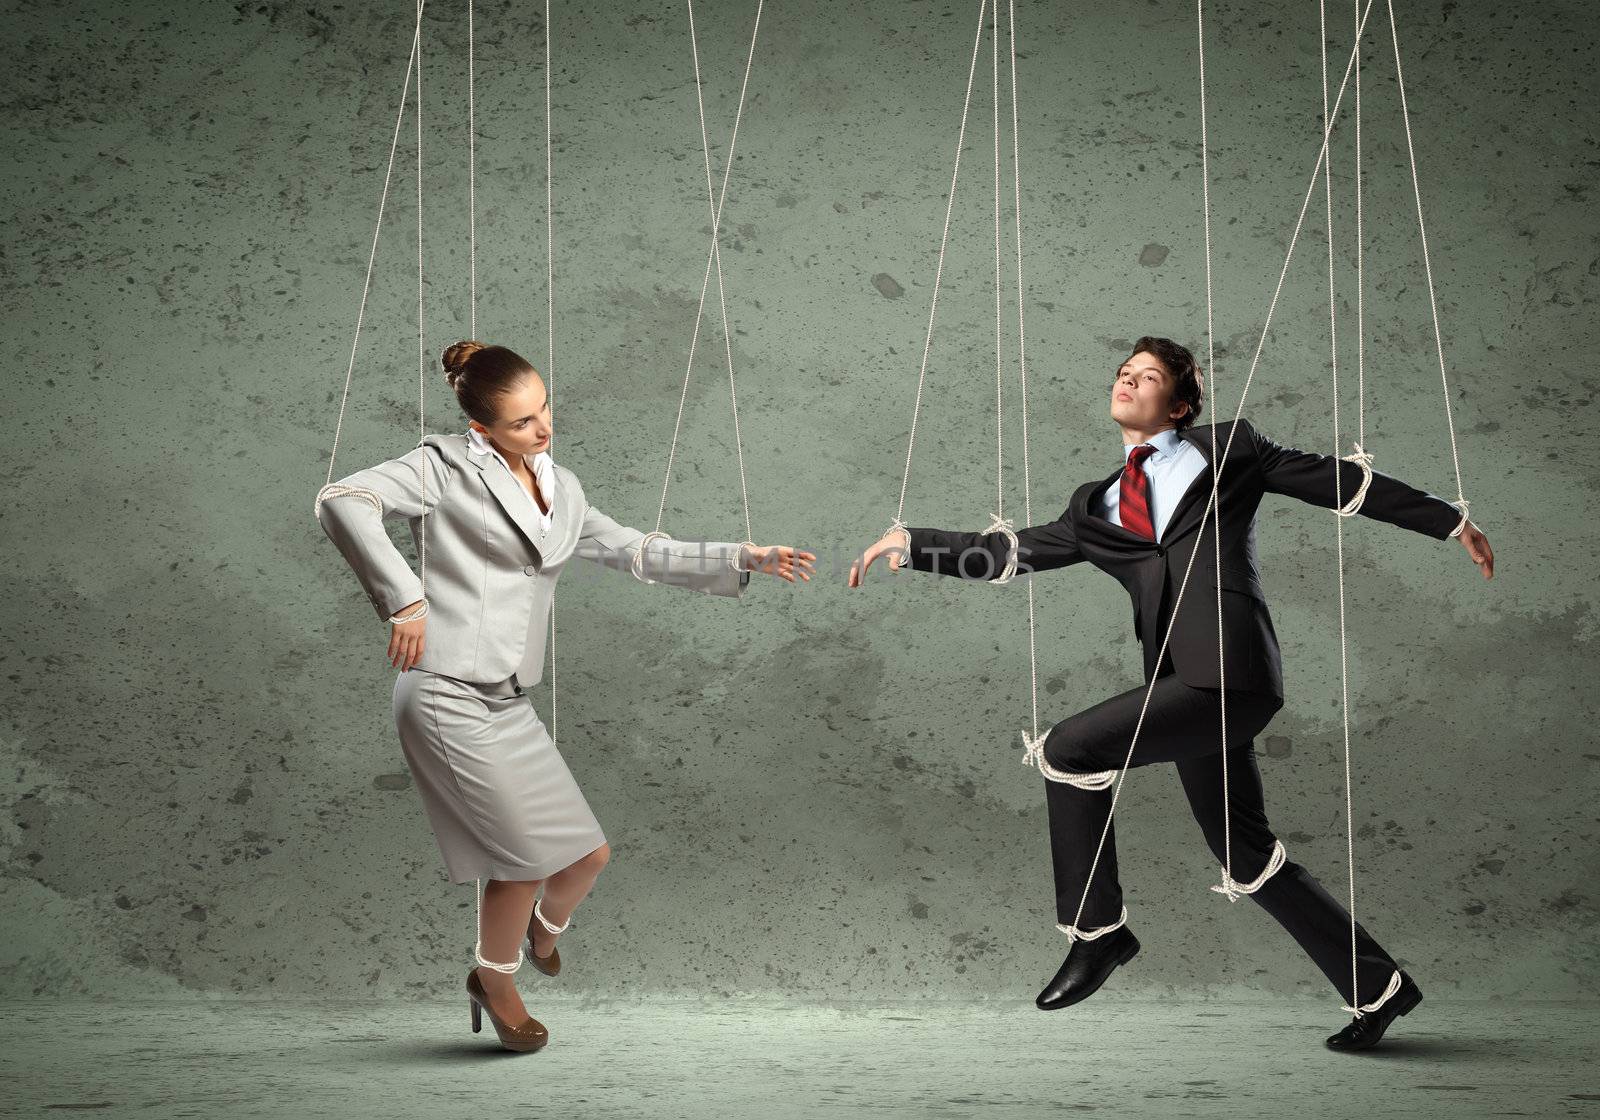 Image of businesspeople hanging on strings like marionettes. Conceptual photography